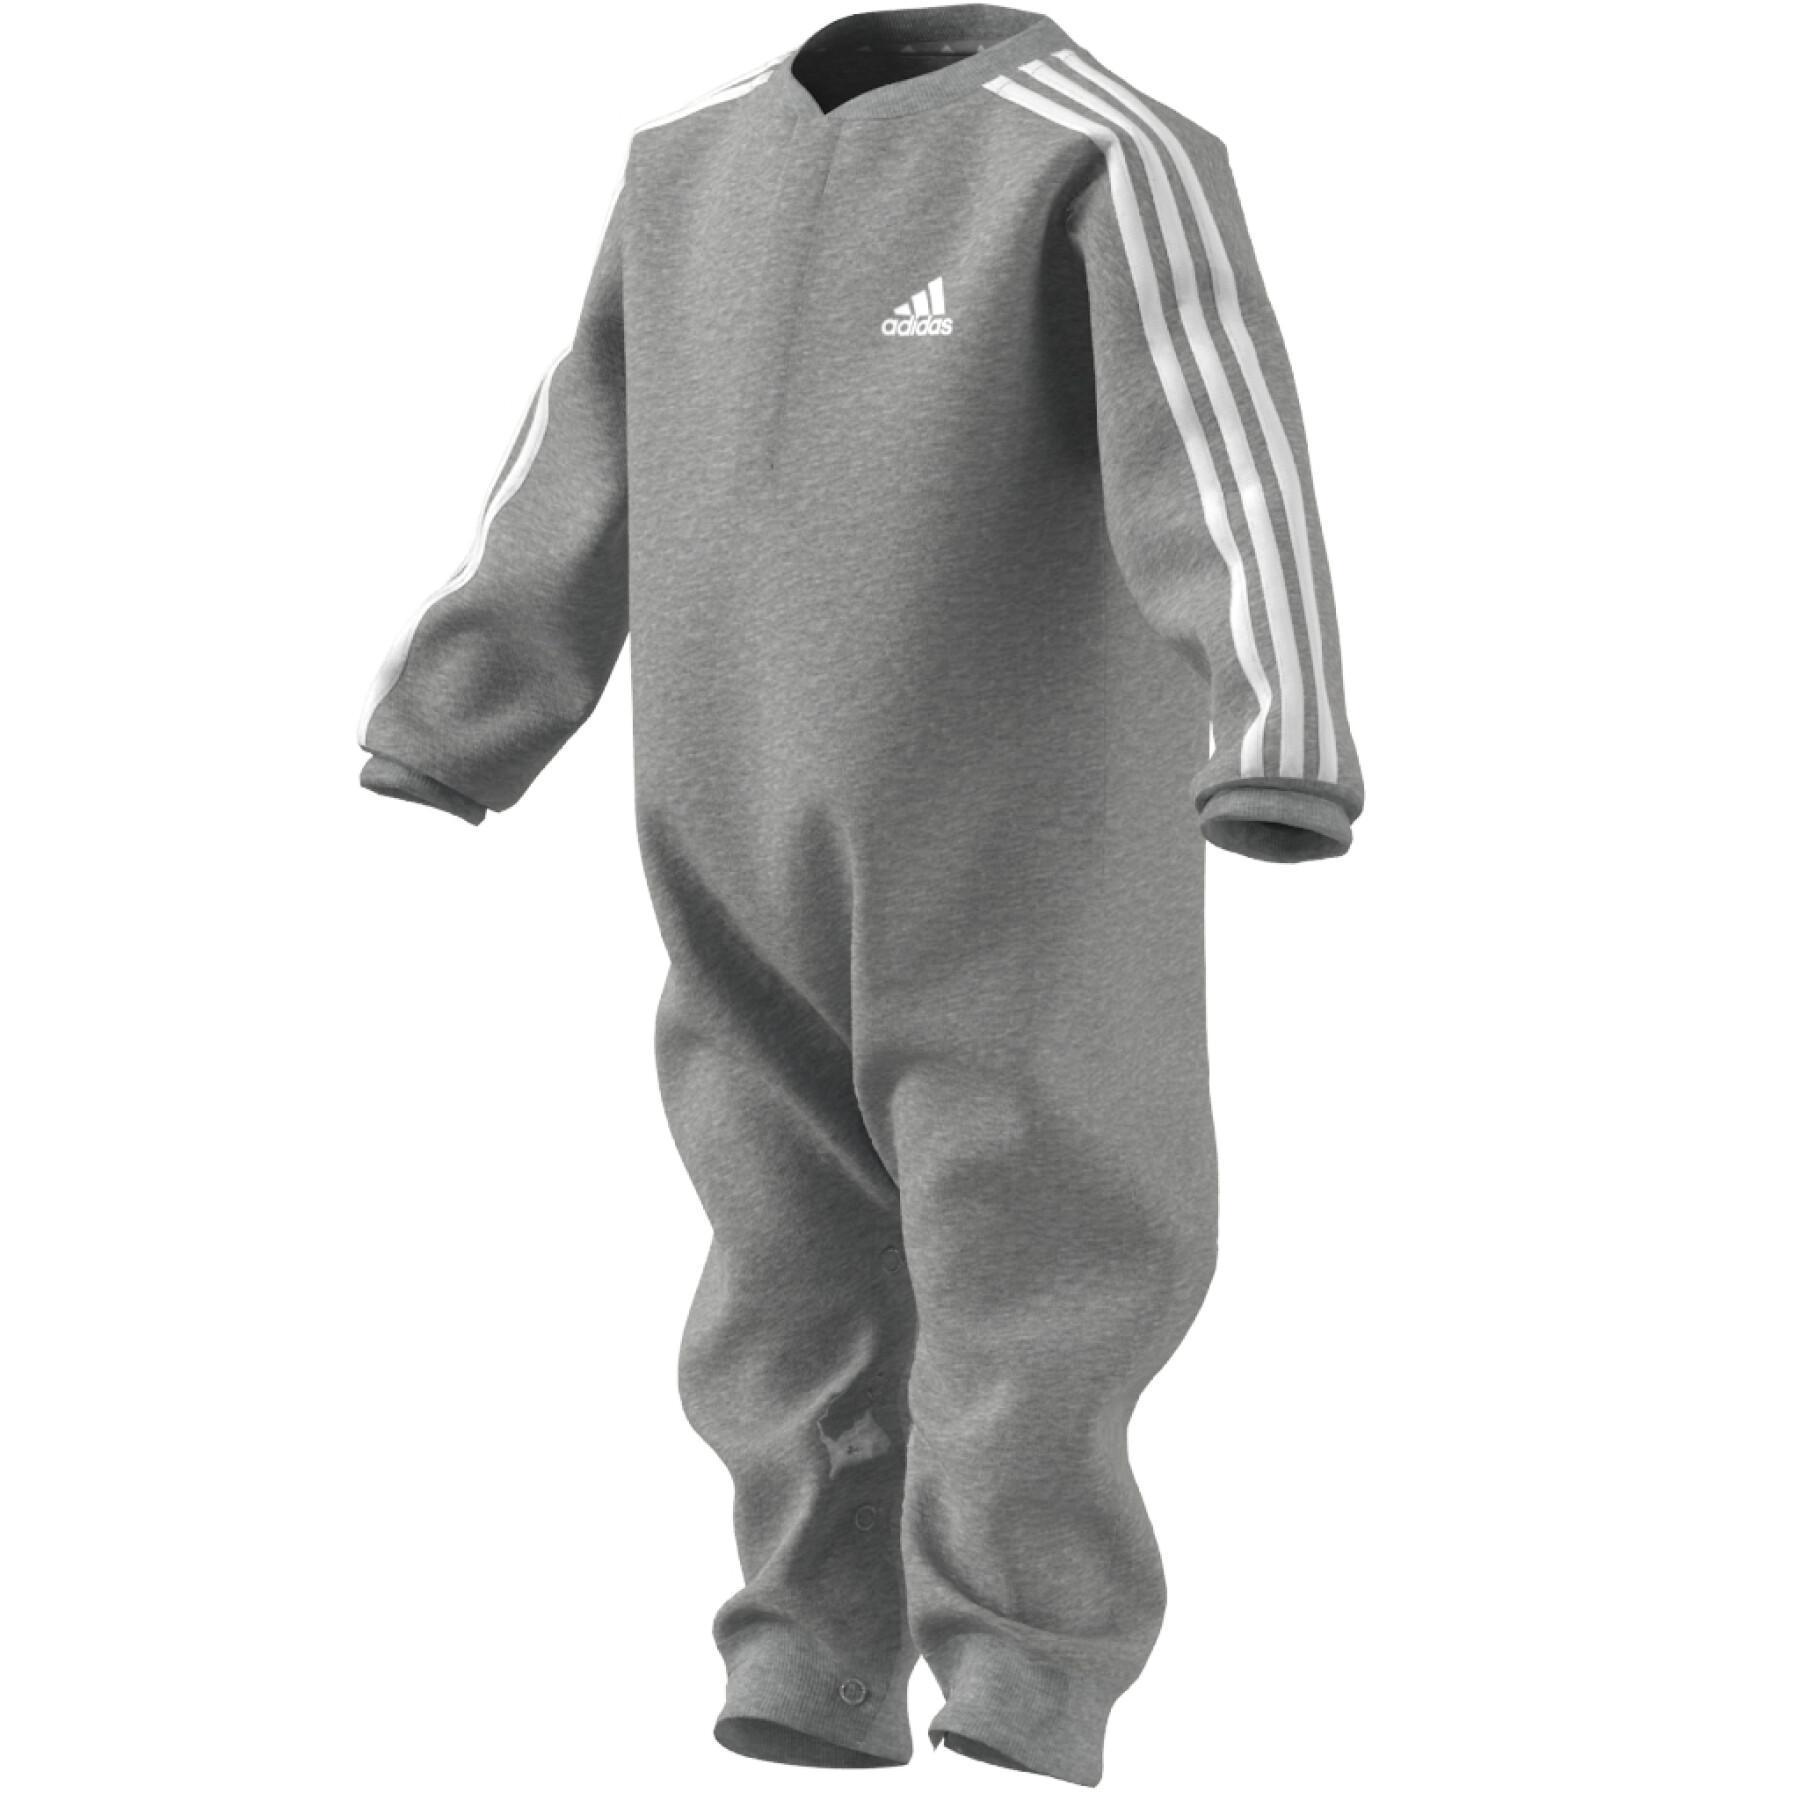 Baby body adidas Essentials French Terry